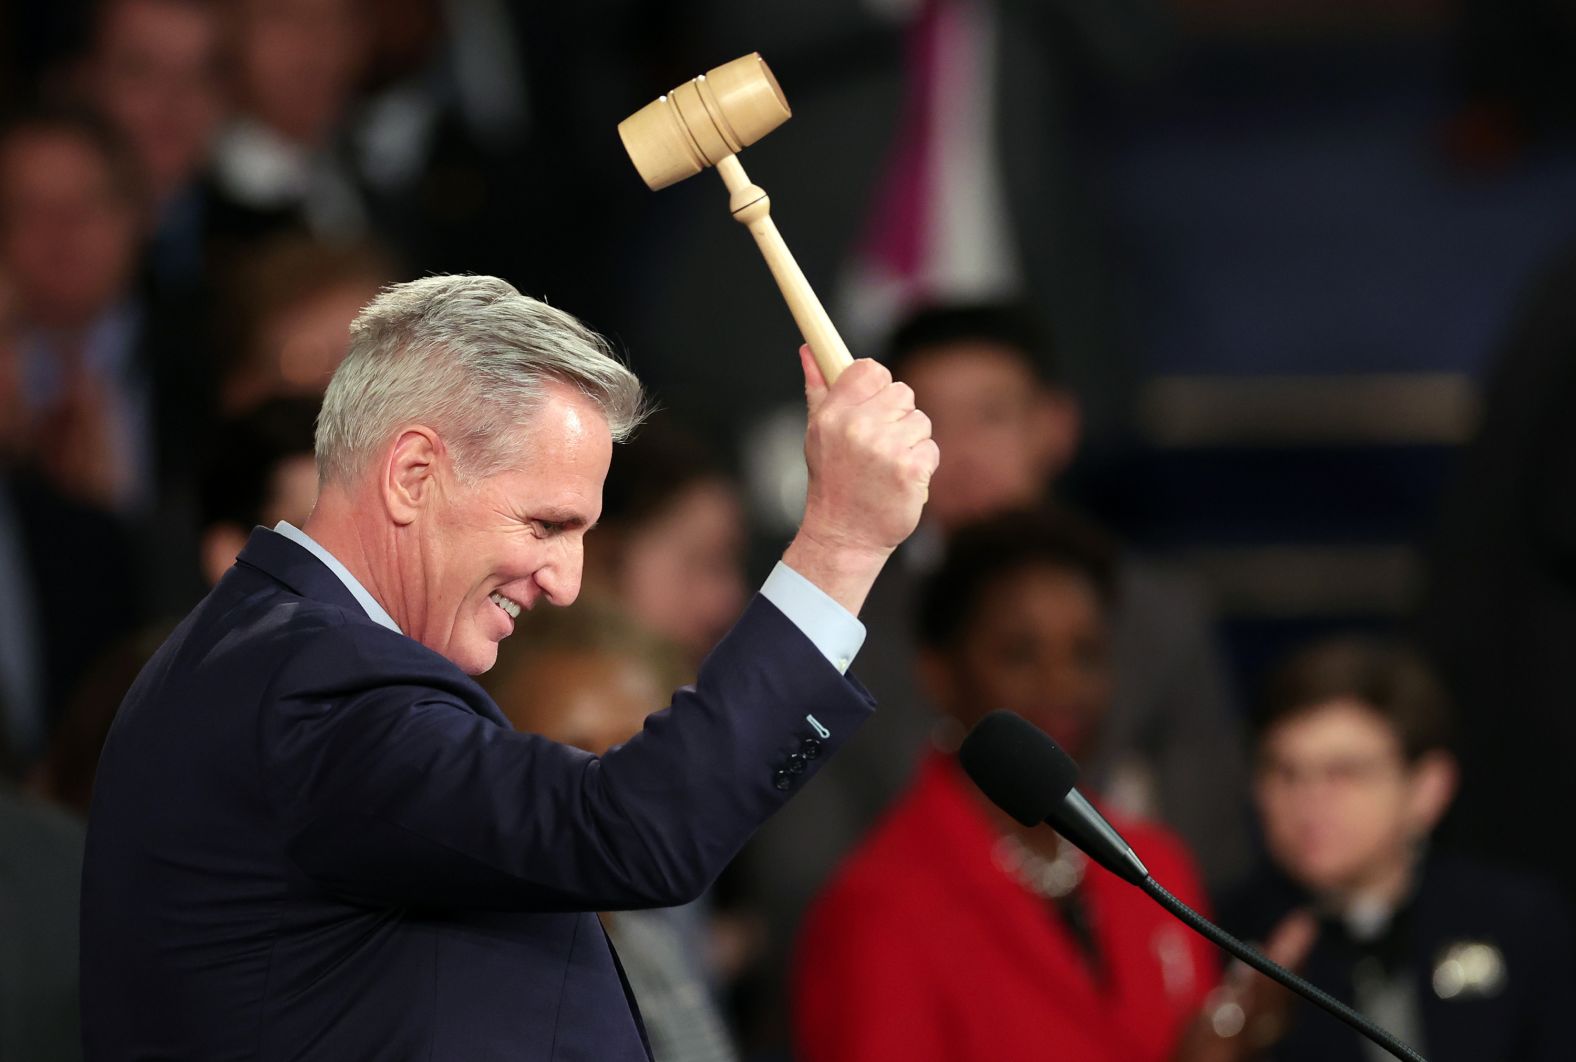 Kevin McCarthy celebrates with the gavel after being elected speaker of the House of Representatives on Saturday, January 7. The Republican leader triumphed early Saturday morning after <a href="index.php?page=&url=https%3A%2F%2Fwww.cnn.com%2F2023%2F01%2F03%2Fpolitics%2Fgallery%2Fhouse-speaker-vote-2023%2Findex.html" target="_blank">15 rounds of votes held over five days</a>. It was the first time in 100 years that the election for House speaker had gone to multiple ballots. It was also the longest speaker contest in 164 years.